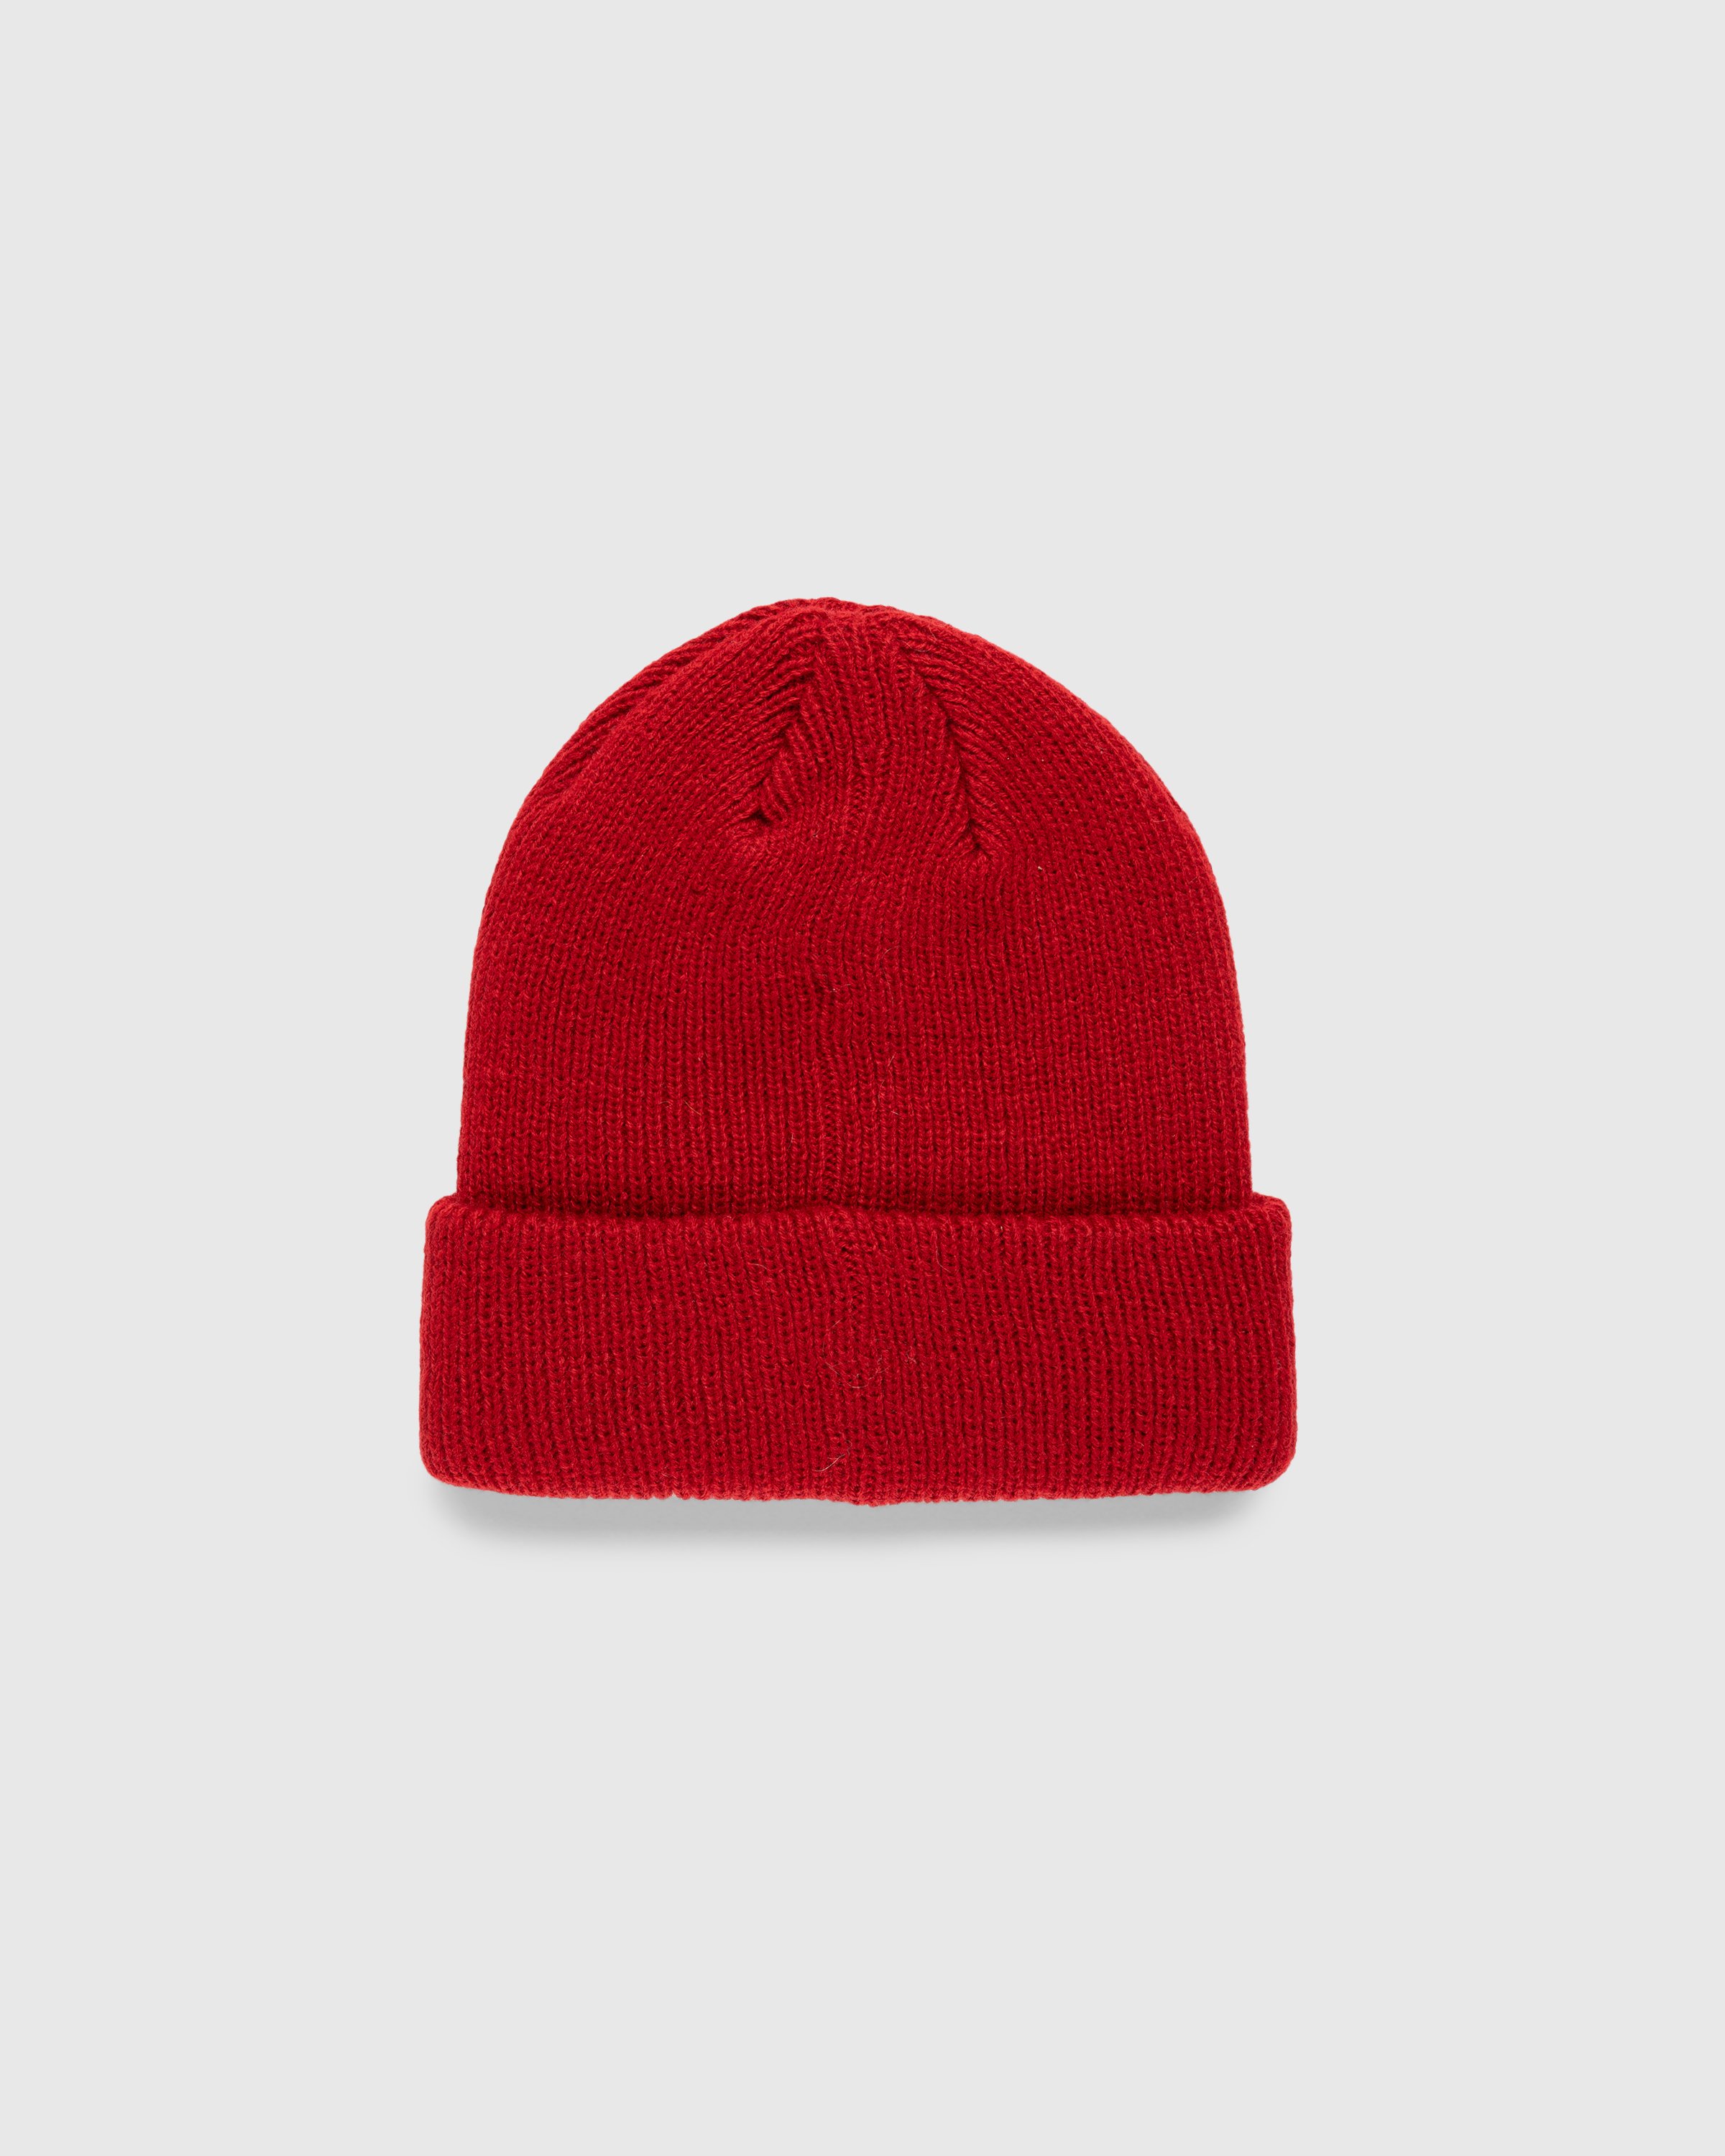 Human Made - Classic Beanie Red - Accessories - Red - Image 2